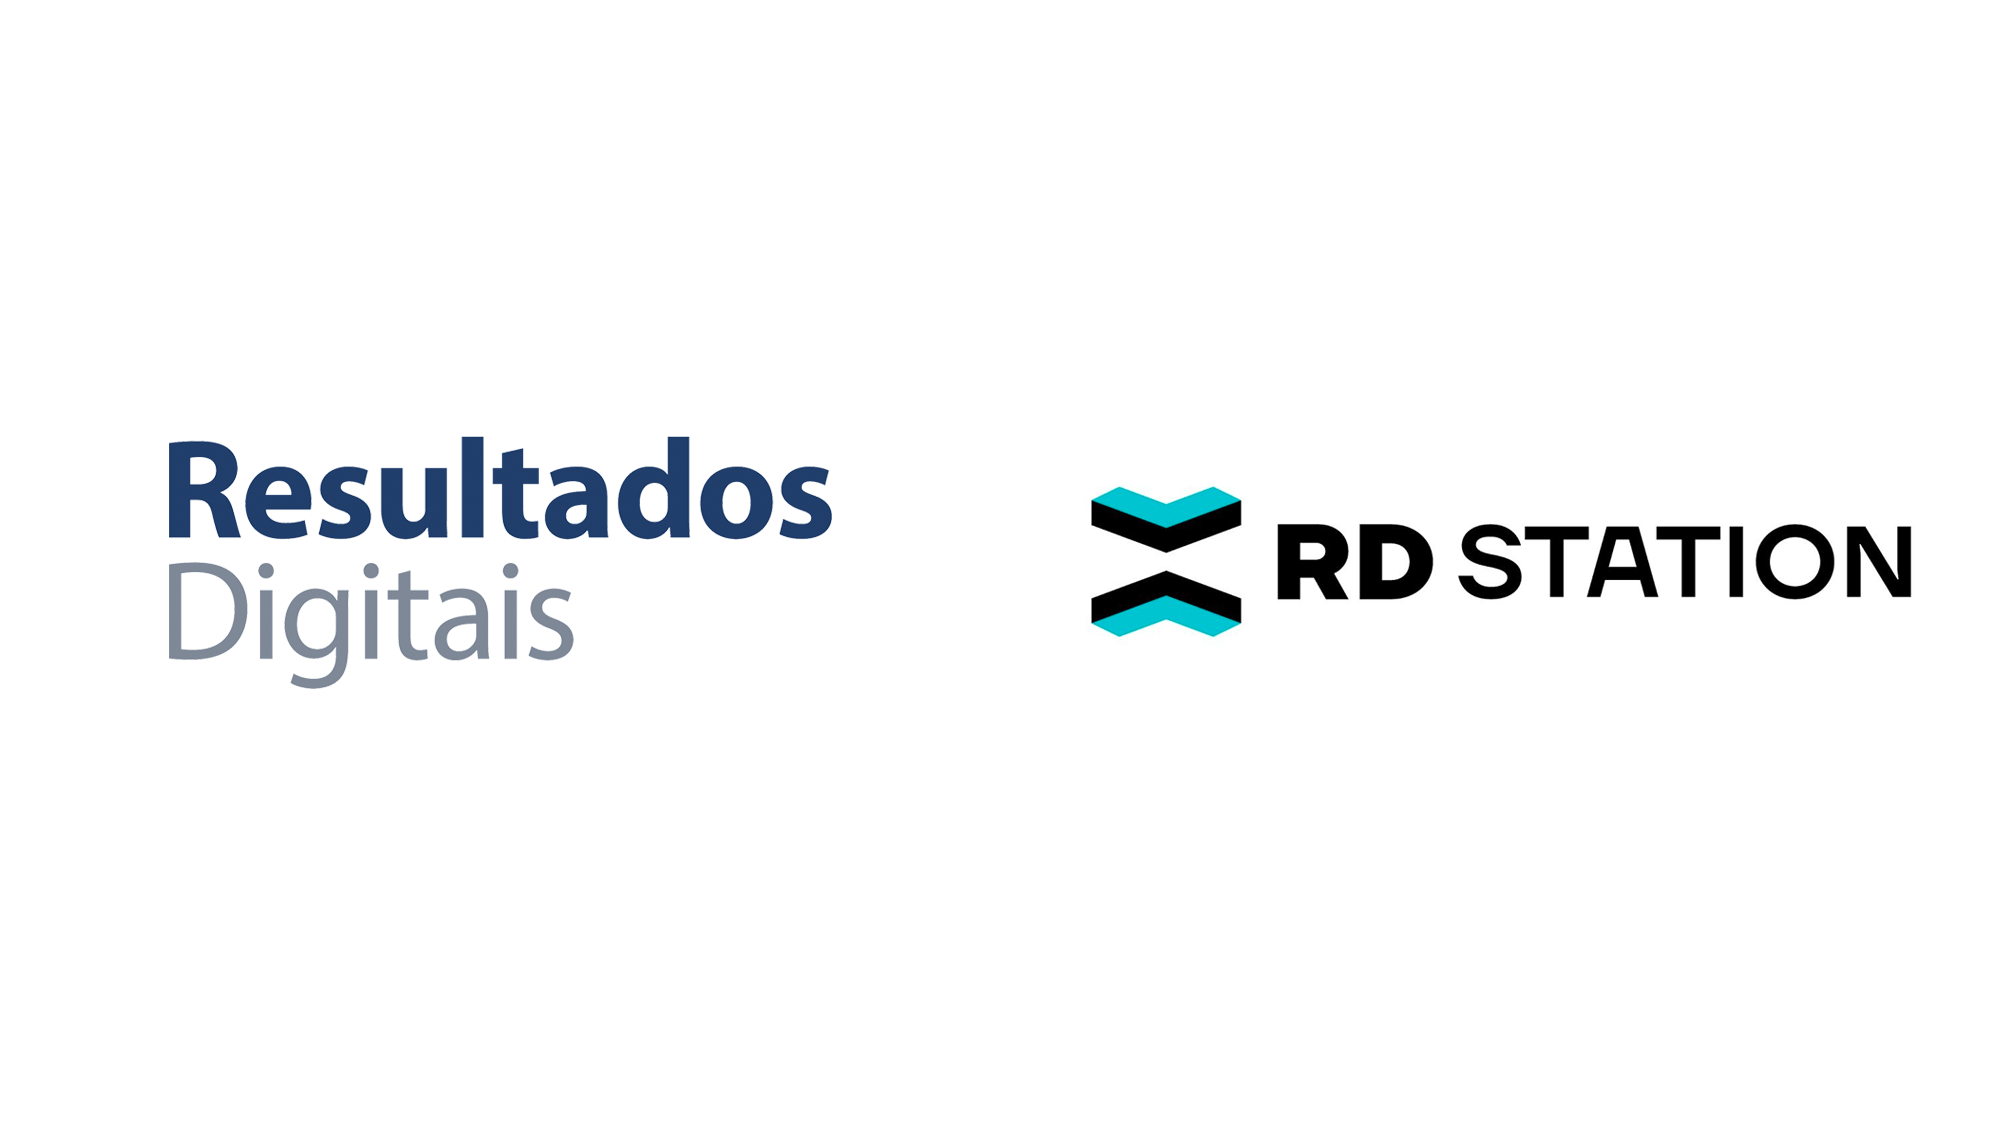 Brand New: New Name and Logo for RD Station